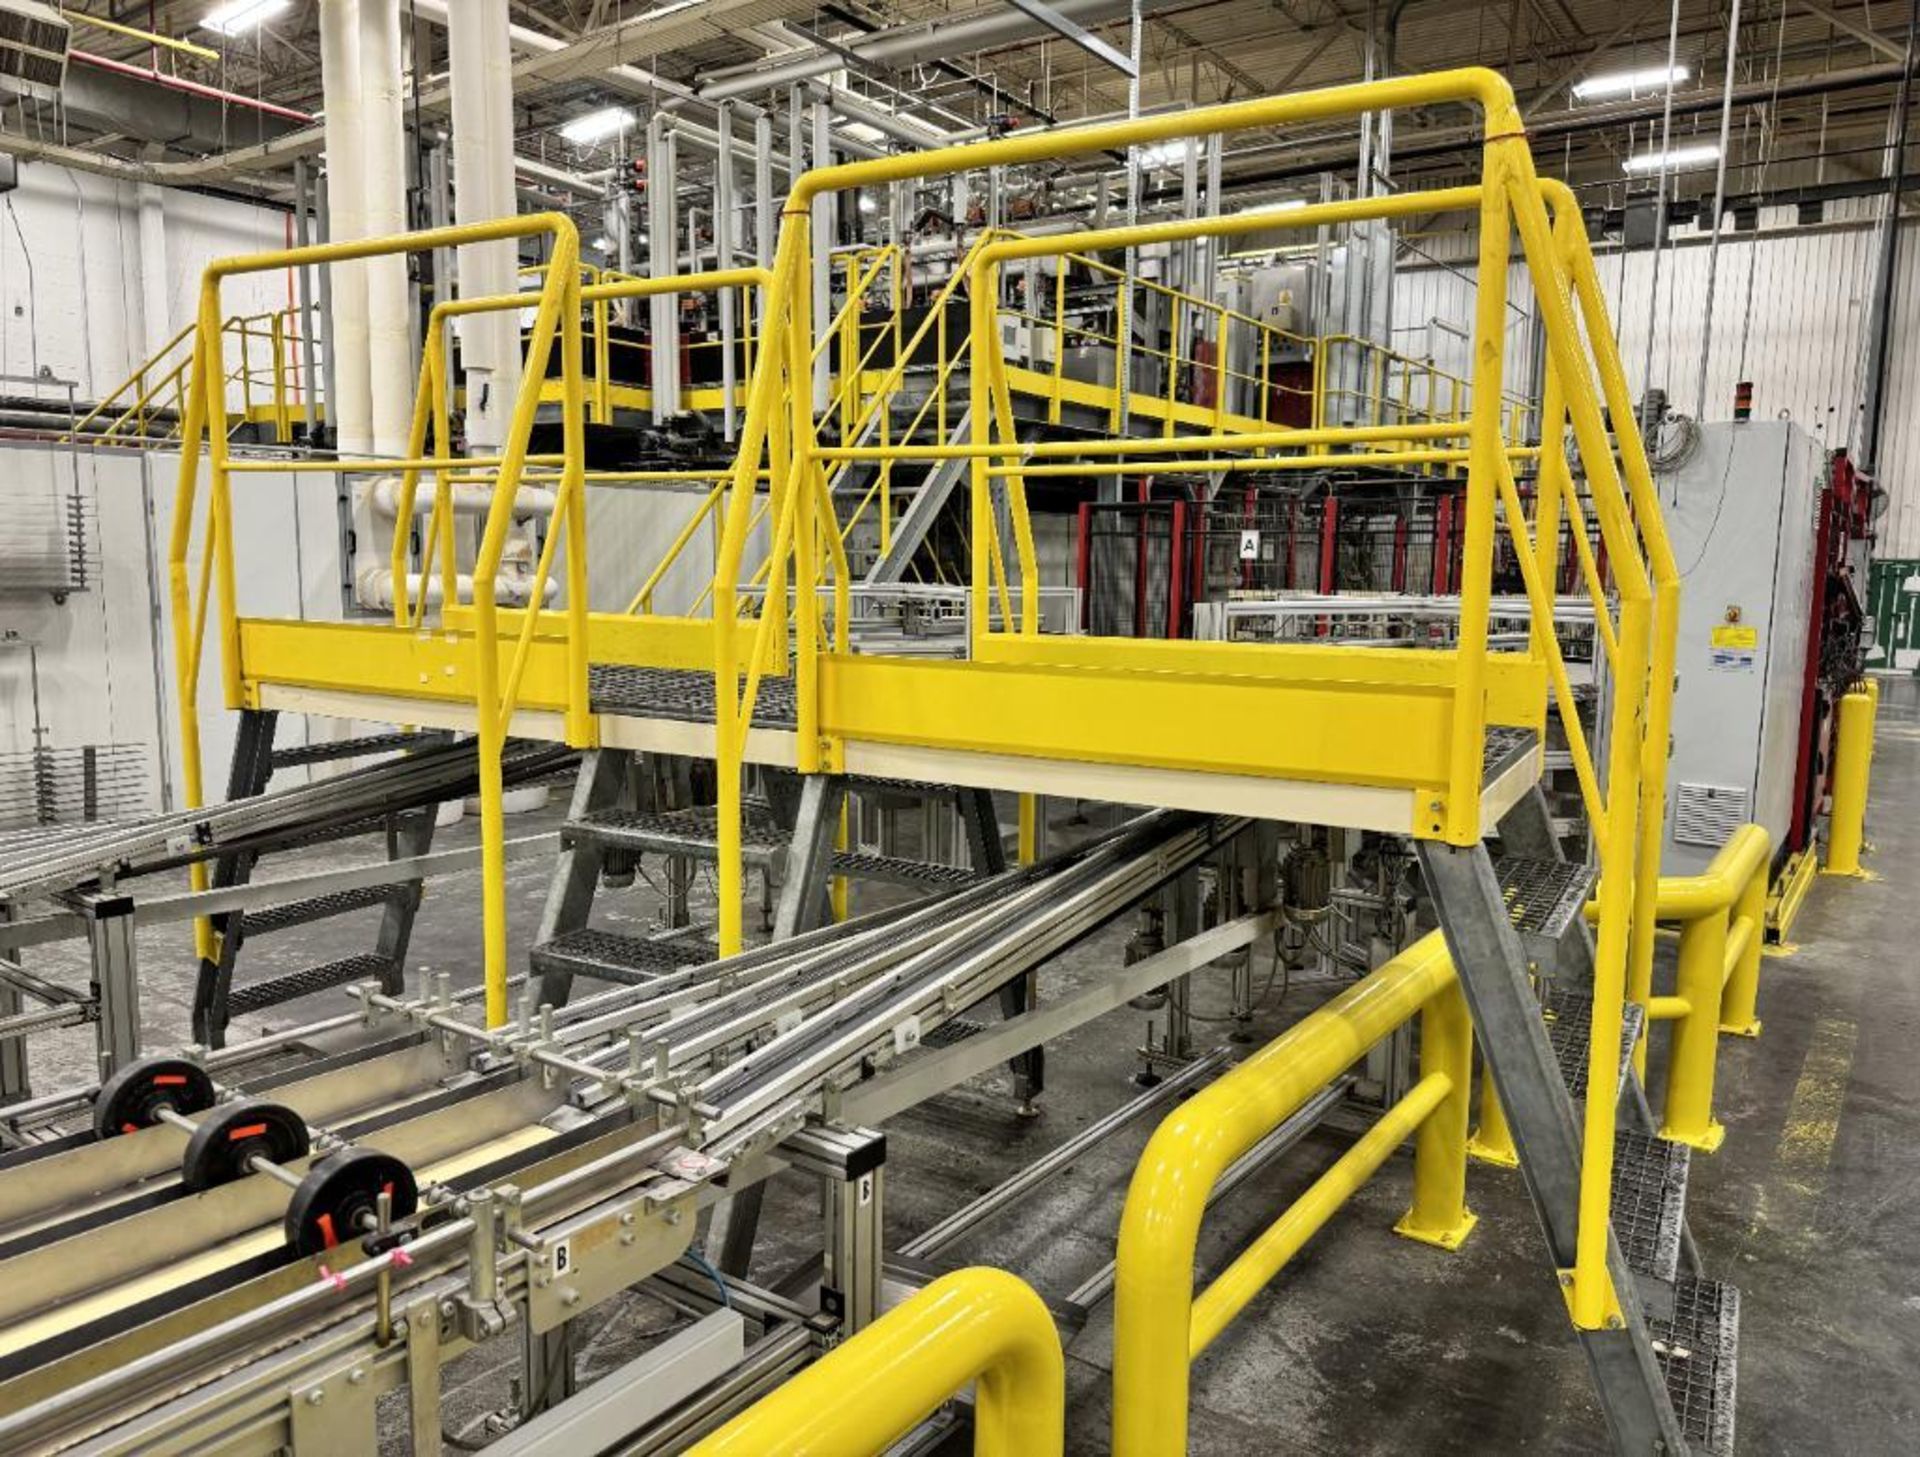 Herrhammer Dual Lane Tealight Candle Making Line. Approximate output 900,000 Pieces Per Day. Consist - Image 44 of 55